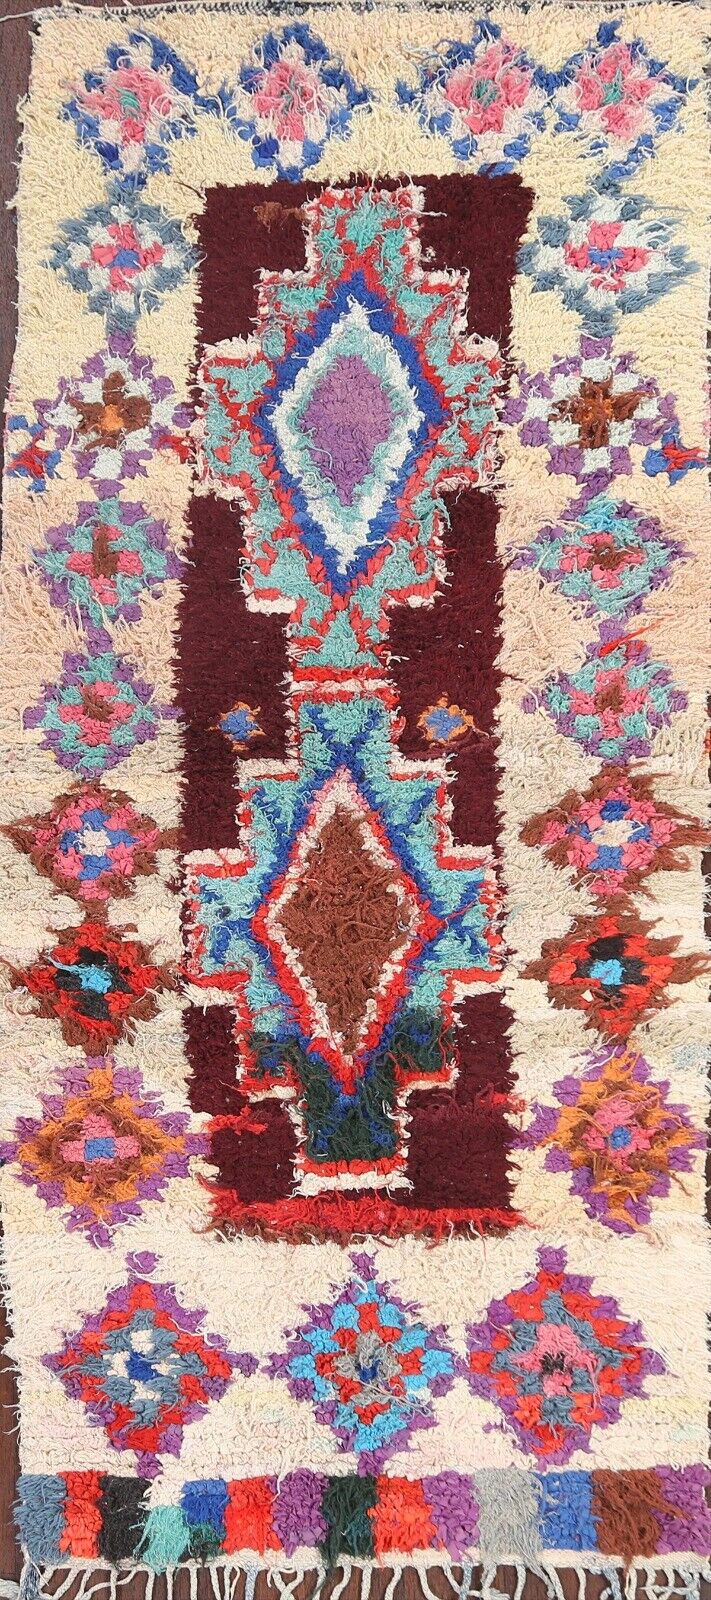 VINTAGE Geometric Moroccan Oriental Runner Rug Wool Hand-knotted 3x7 ft Carpet